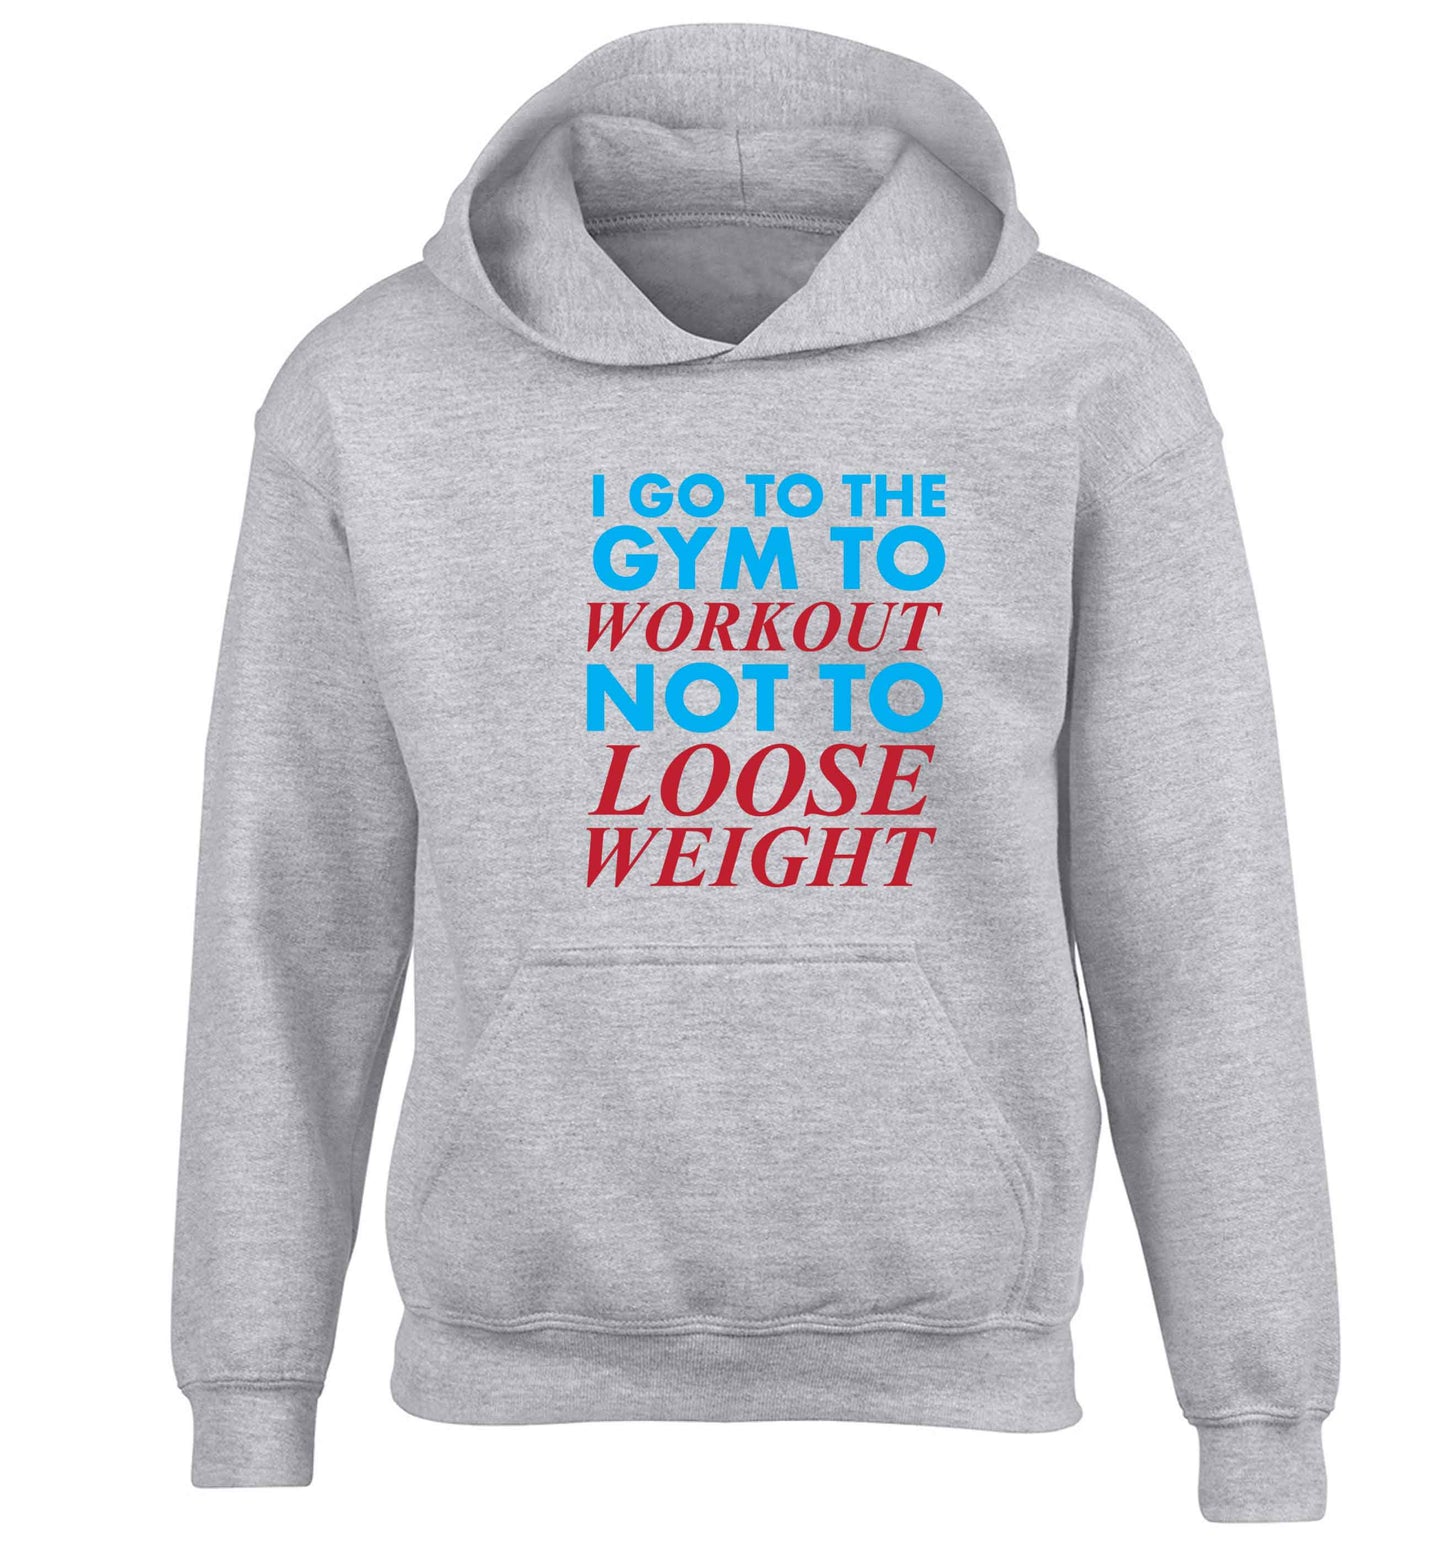 I go to the gym to workout not to loose weight children's grey hoodie 12-13 Years